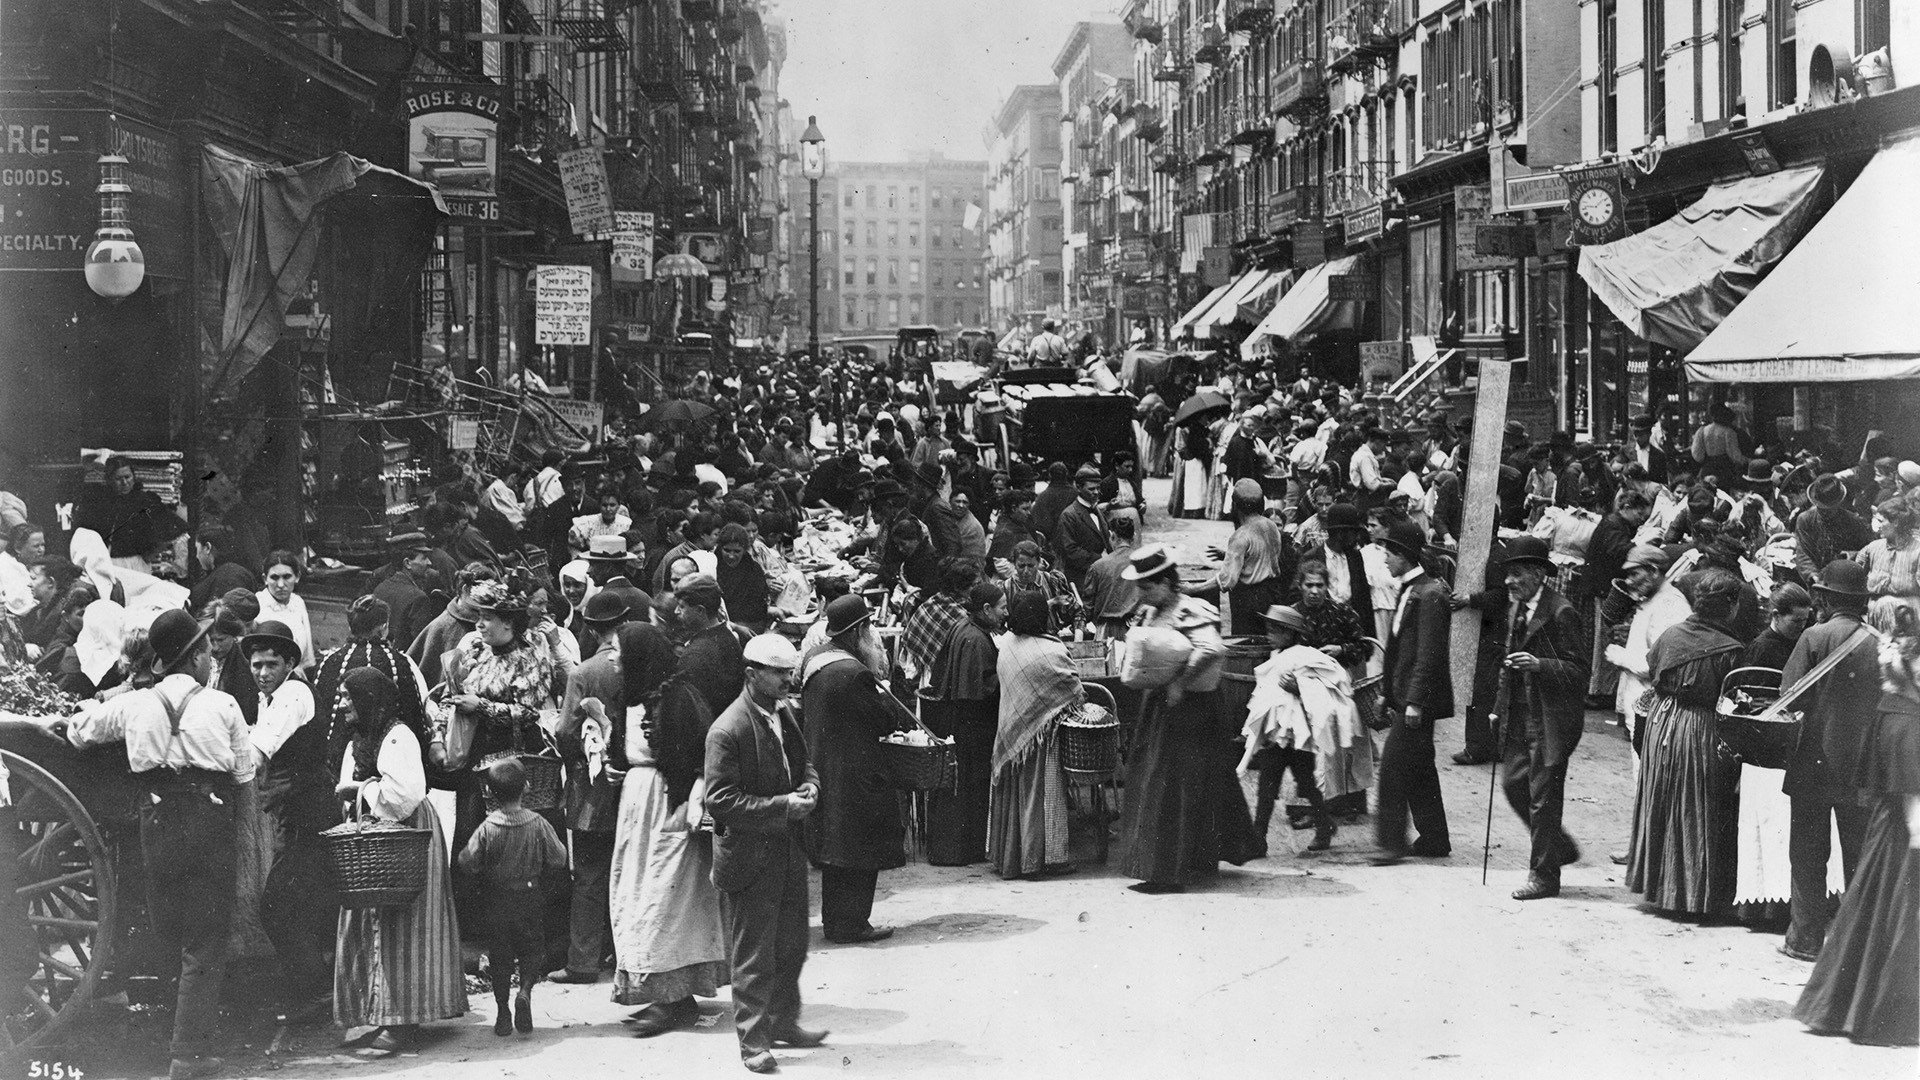 A crowded street on the Lower East Side in 1898. People are shopping from pushcarts and a majority of the signs are in Yiddish.